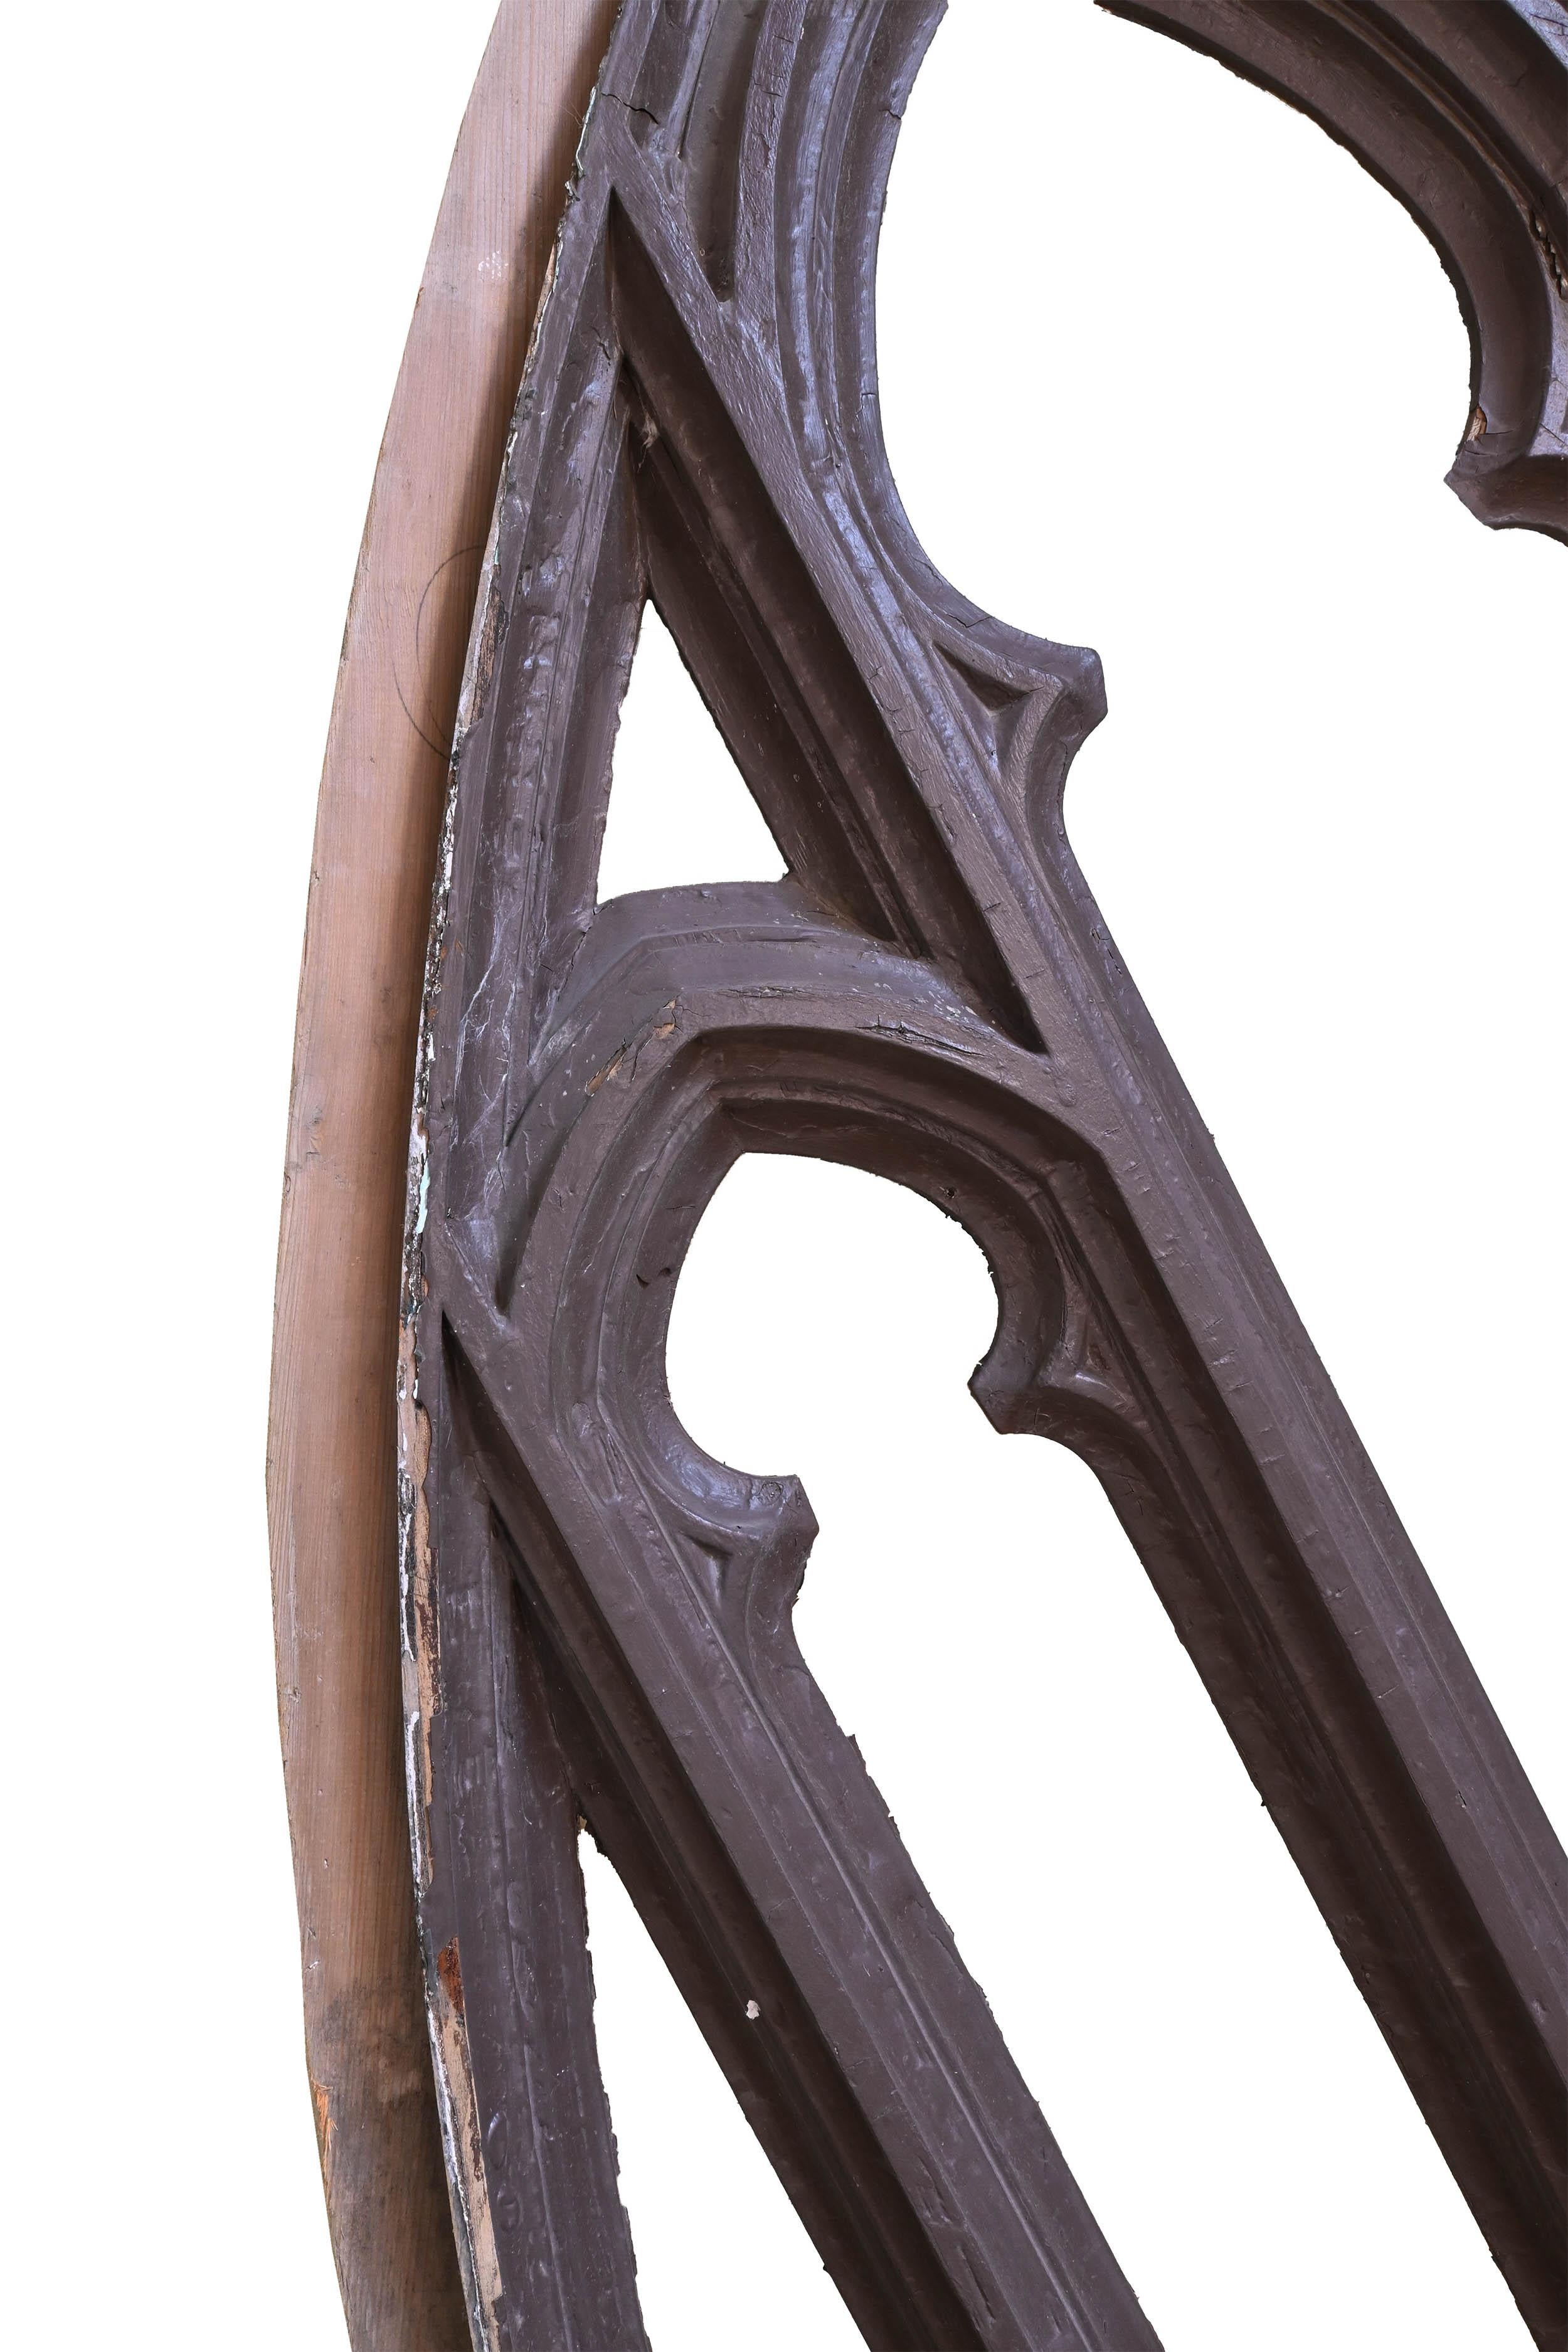 North American Decorative Gothic Arched Frame with Curvilinear Open Work